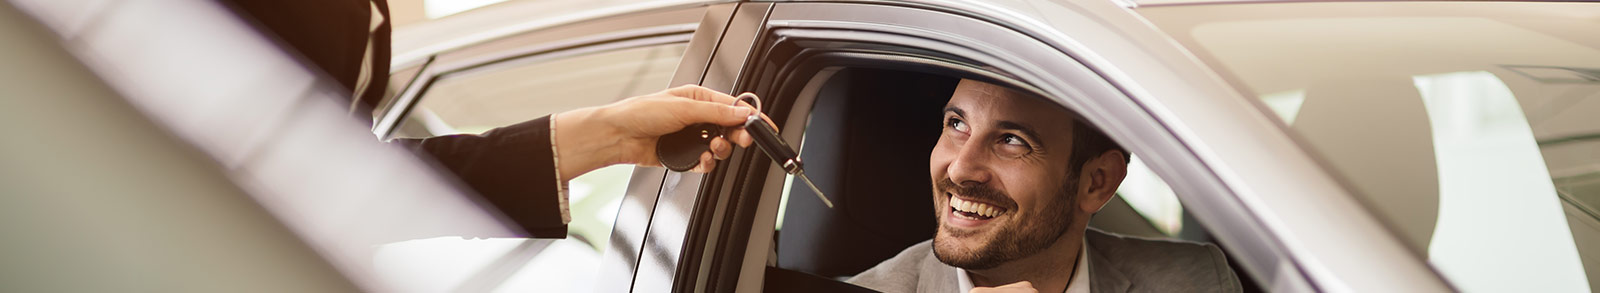 Man in a car smiling while a woman hands him a set of keys